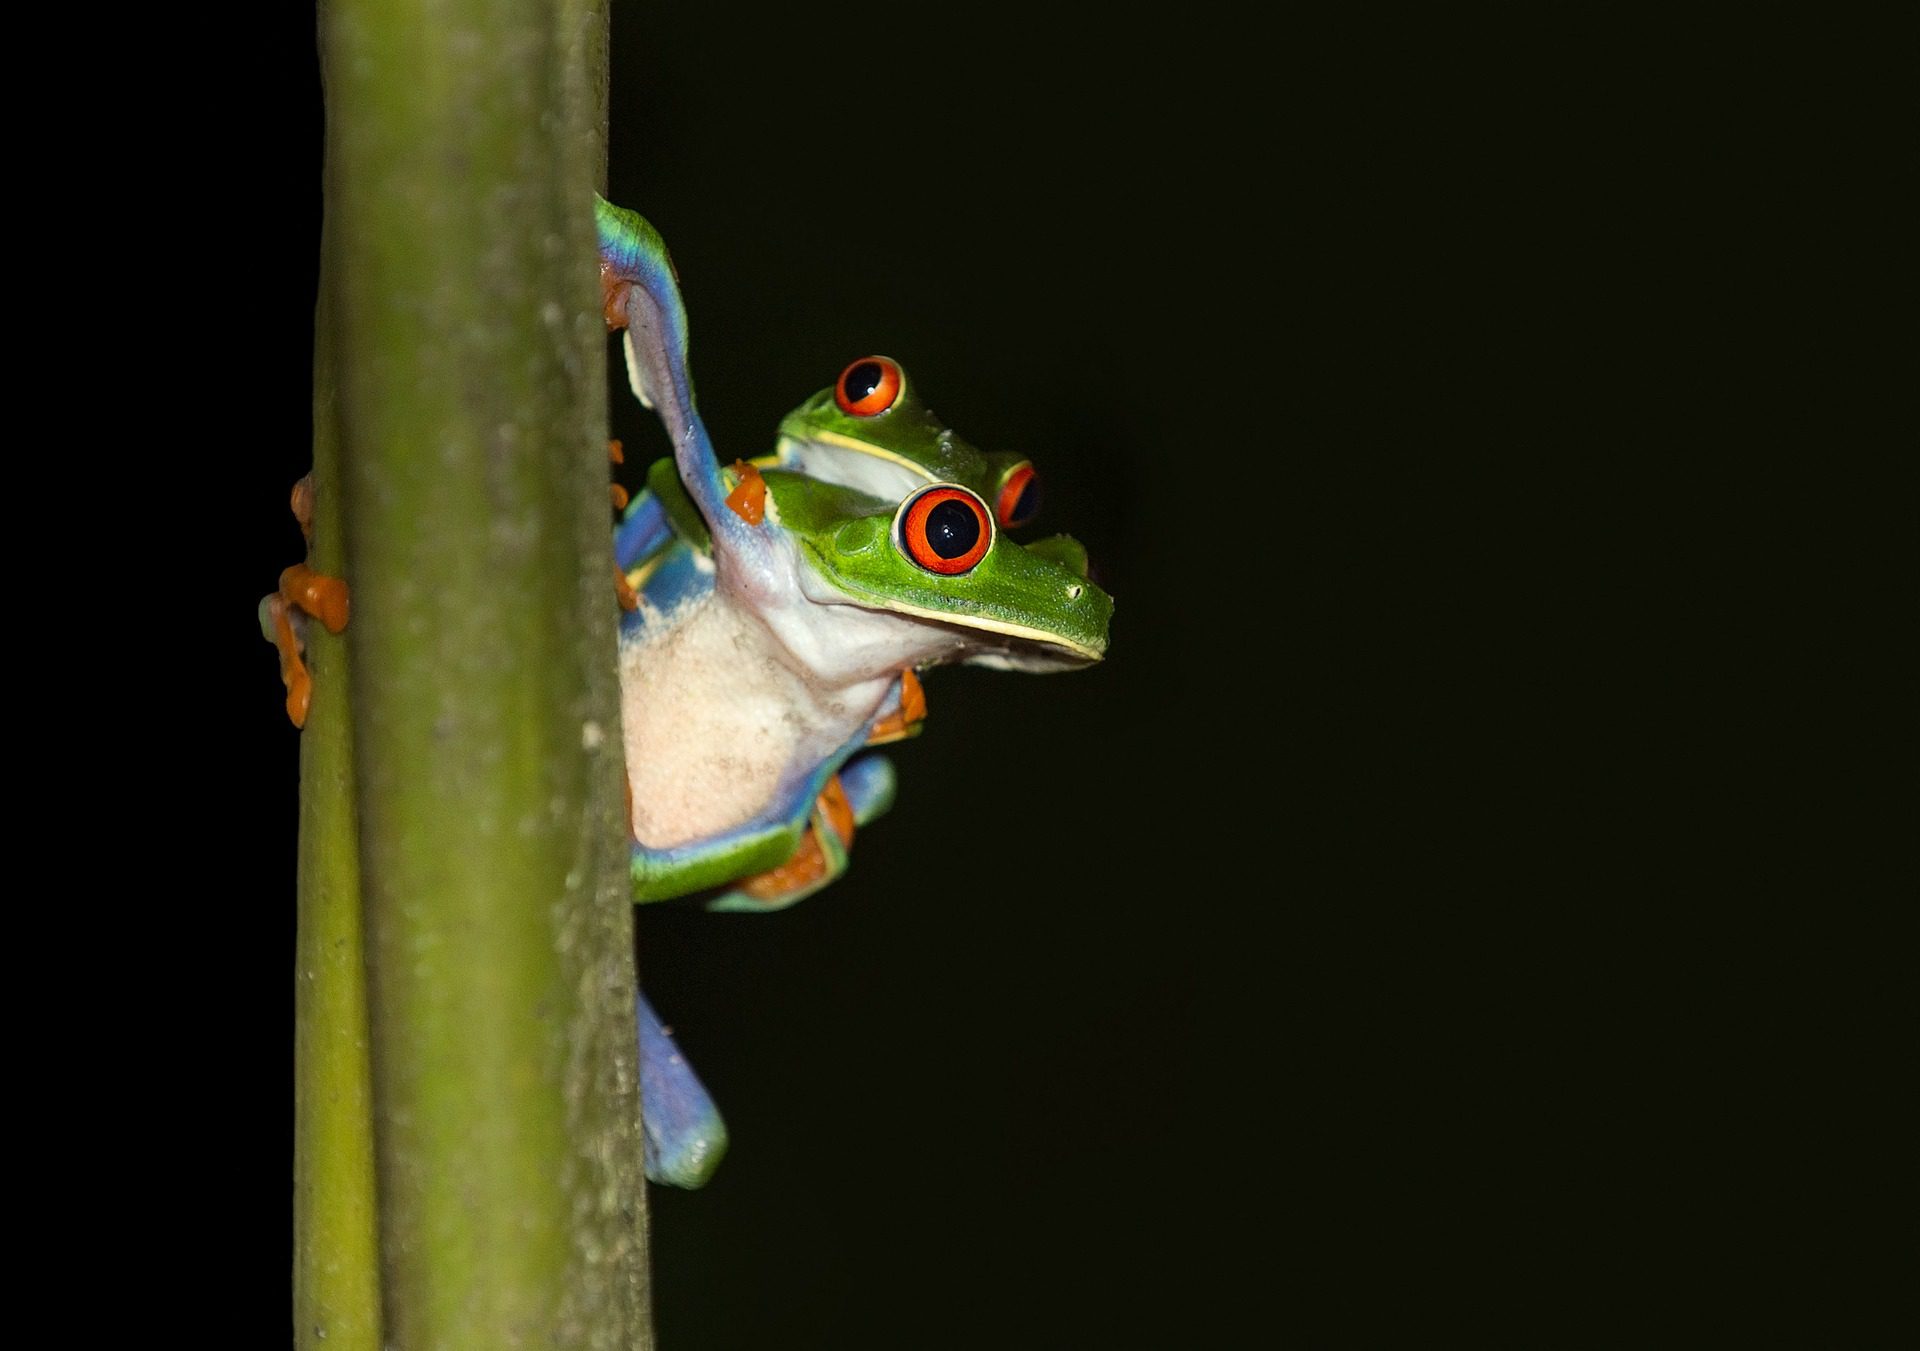 A frog giving another frog a piggy back in Costa Rica to accompany an article on back office services in the country